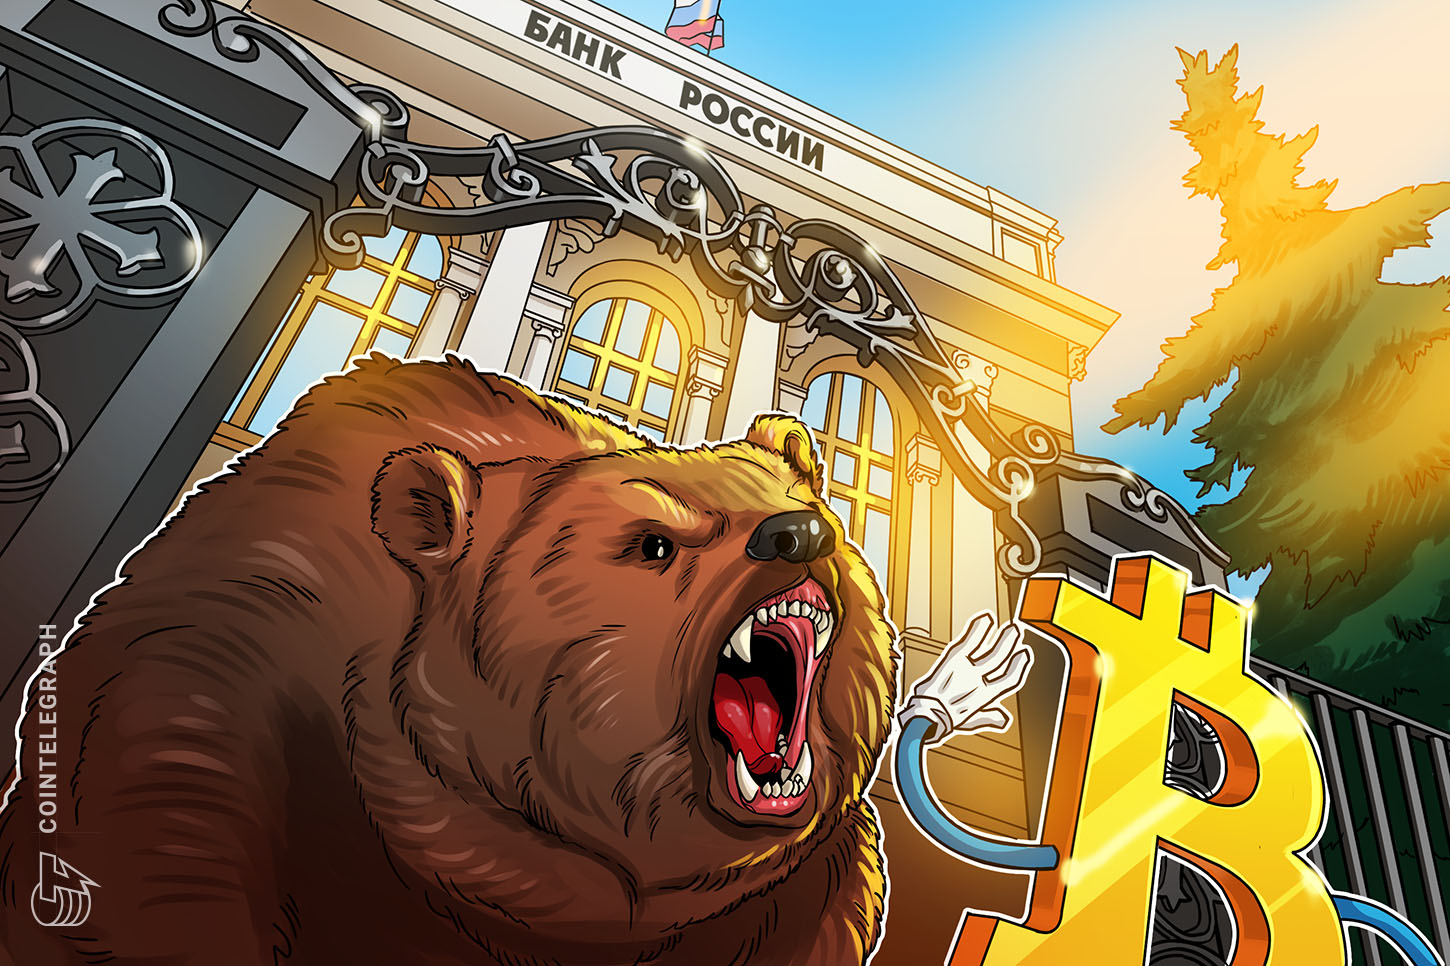 Russian ministry proposes to amend legislation banning crypto transactions